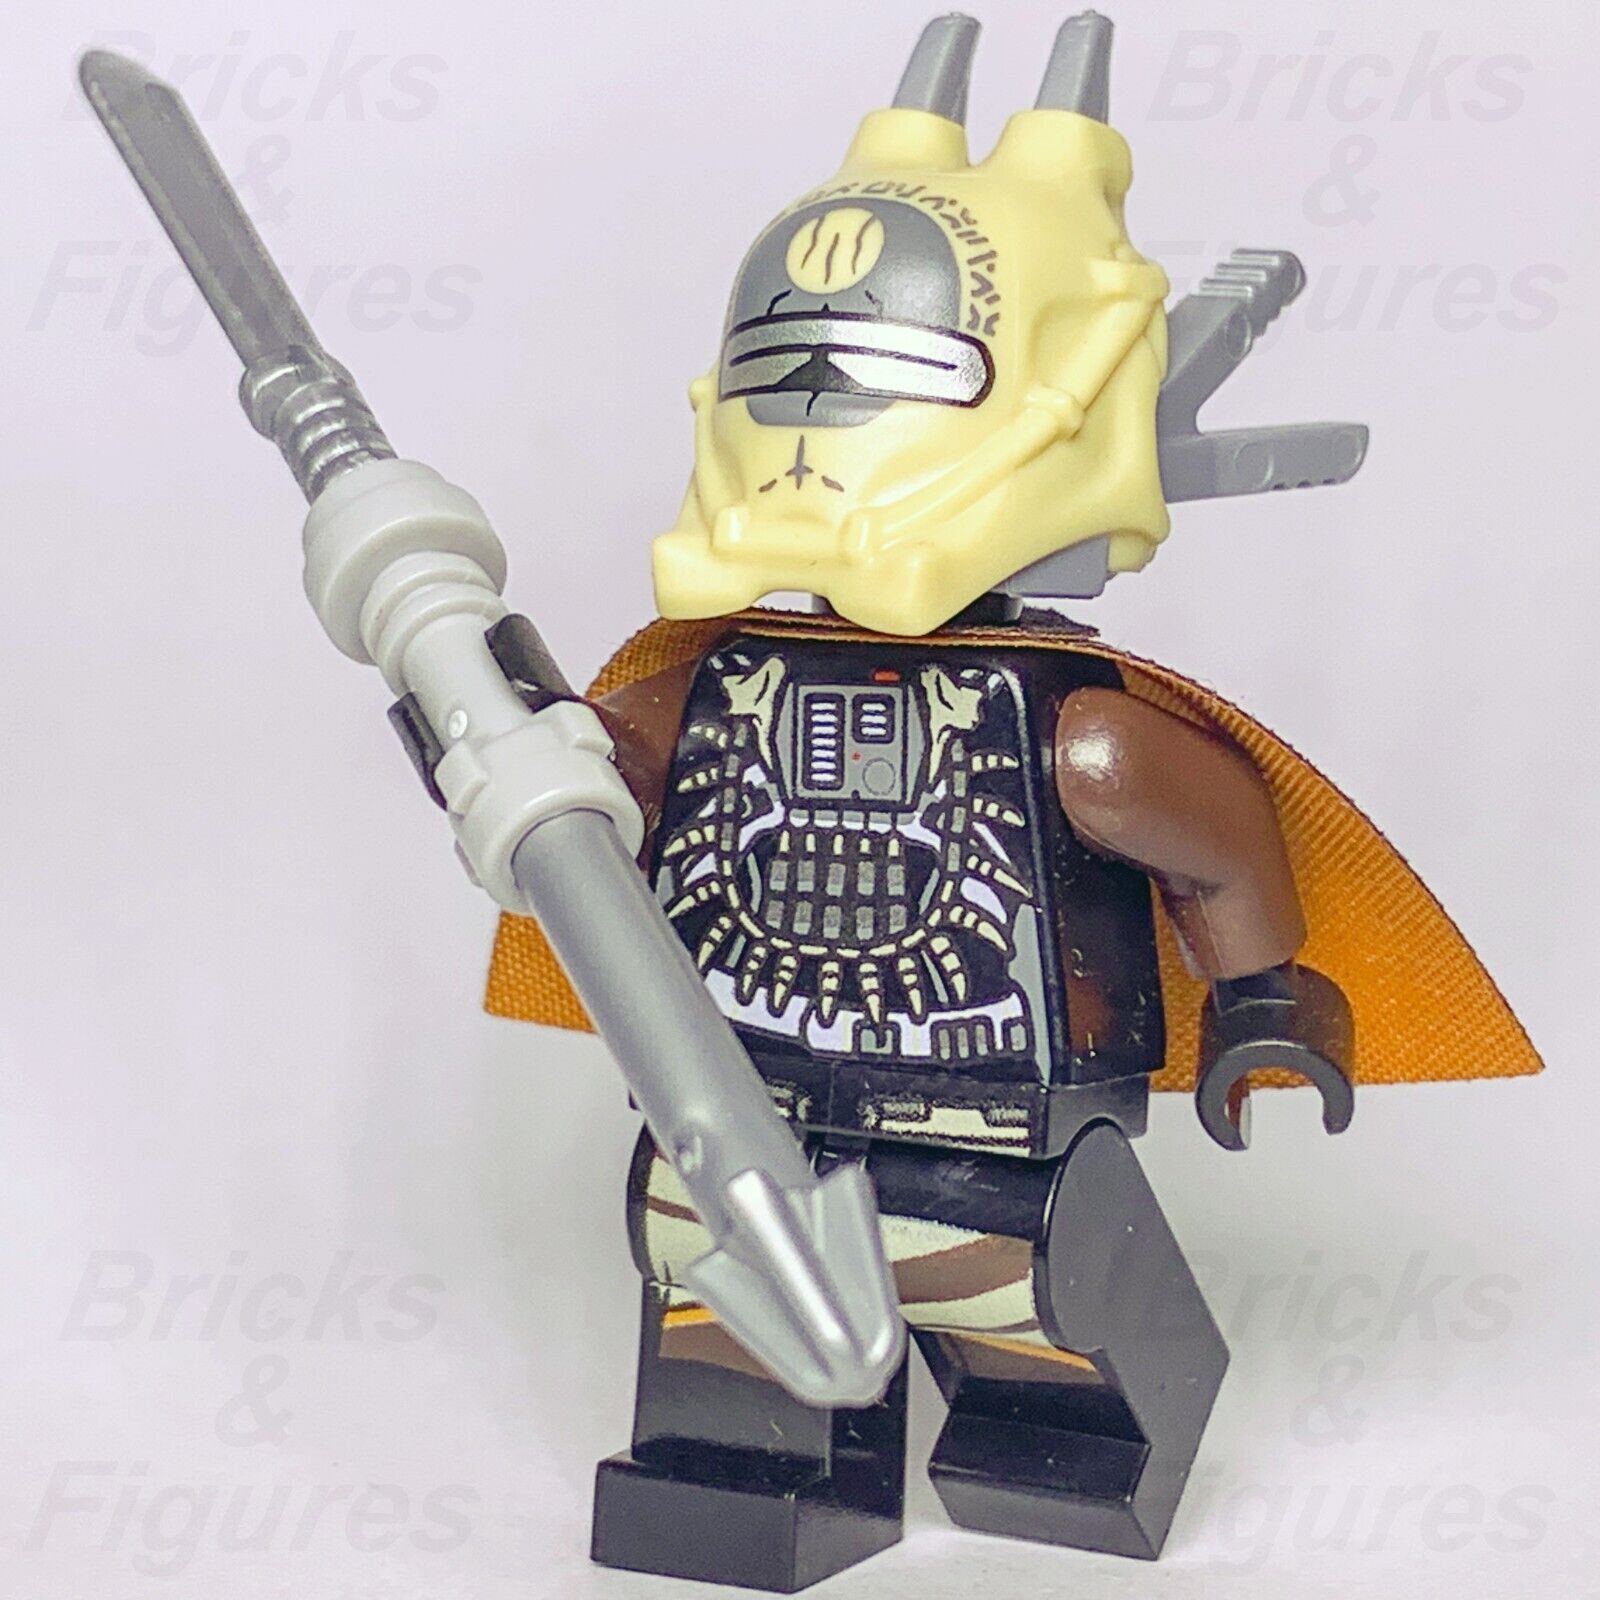 LEGO Star Wars Enfys Nest Minifigure Solo Movie Resistance Fighter 75215 sw0940